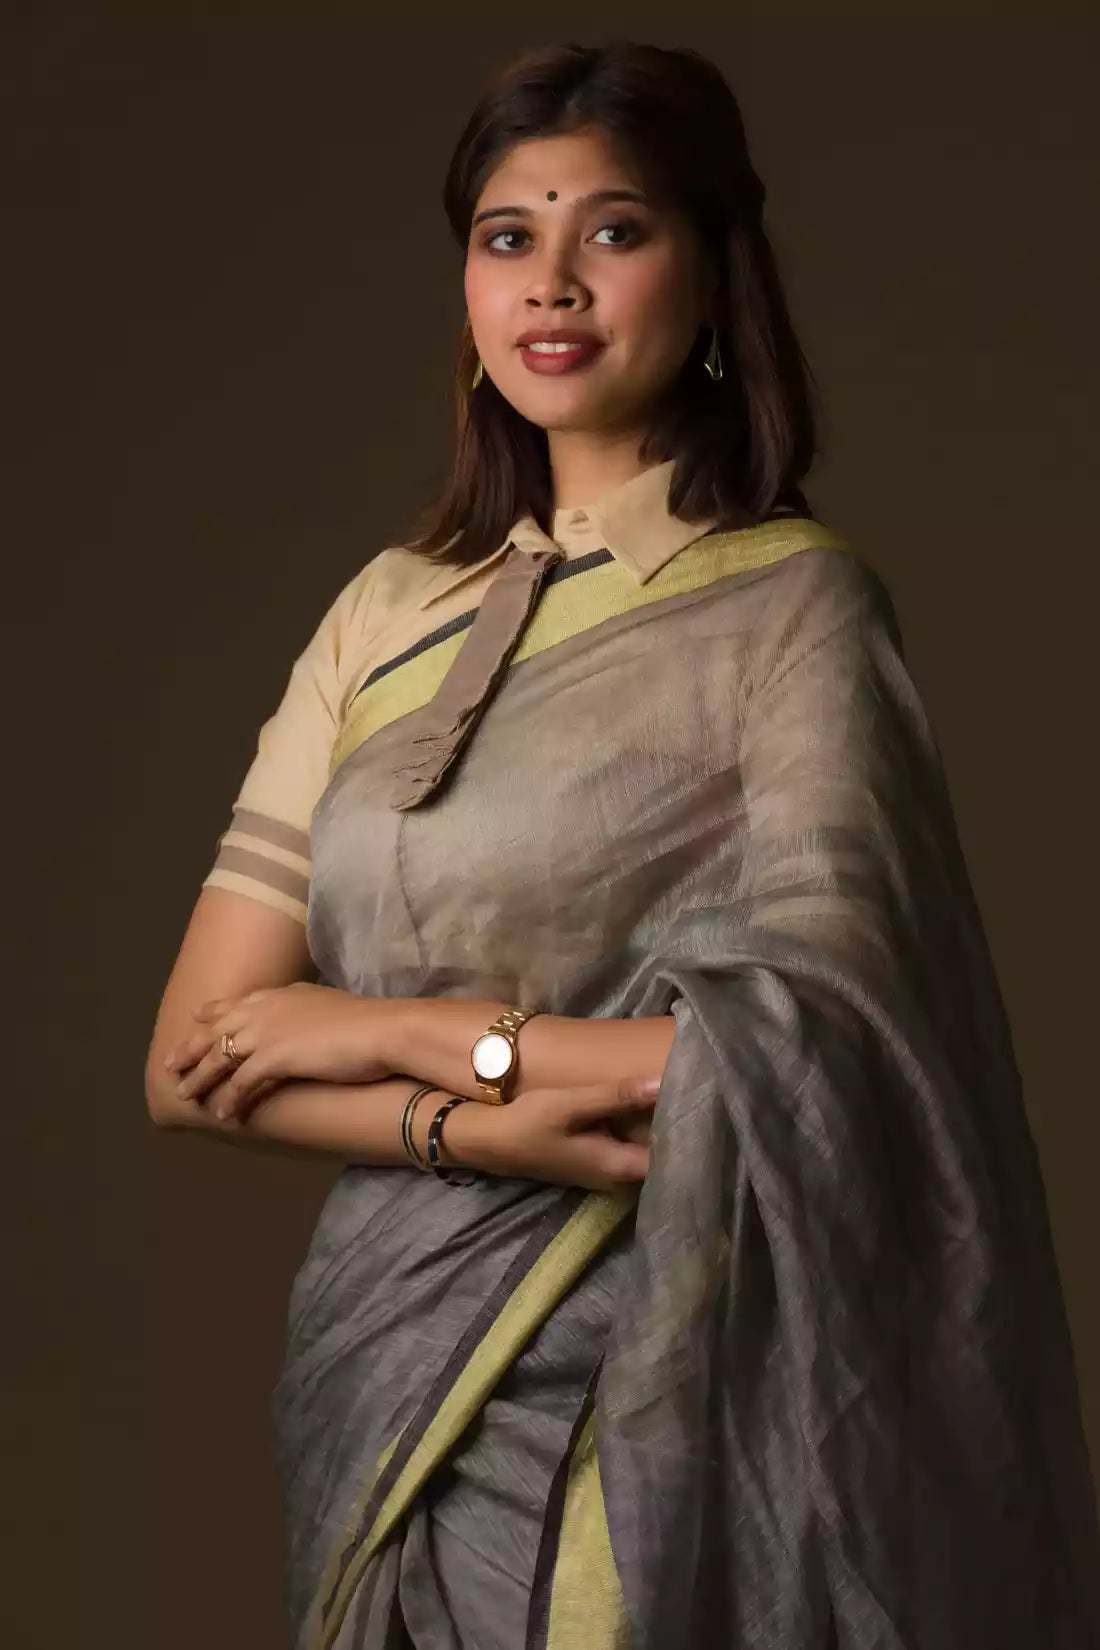 A lady in Grey Silk Linen Jamdani hand weaving Saree standing against a beige background